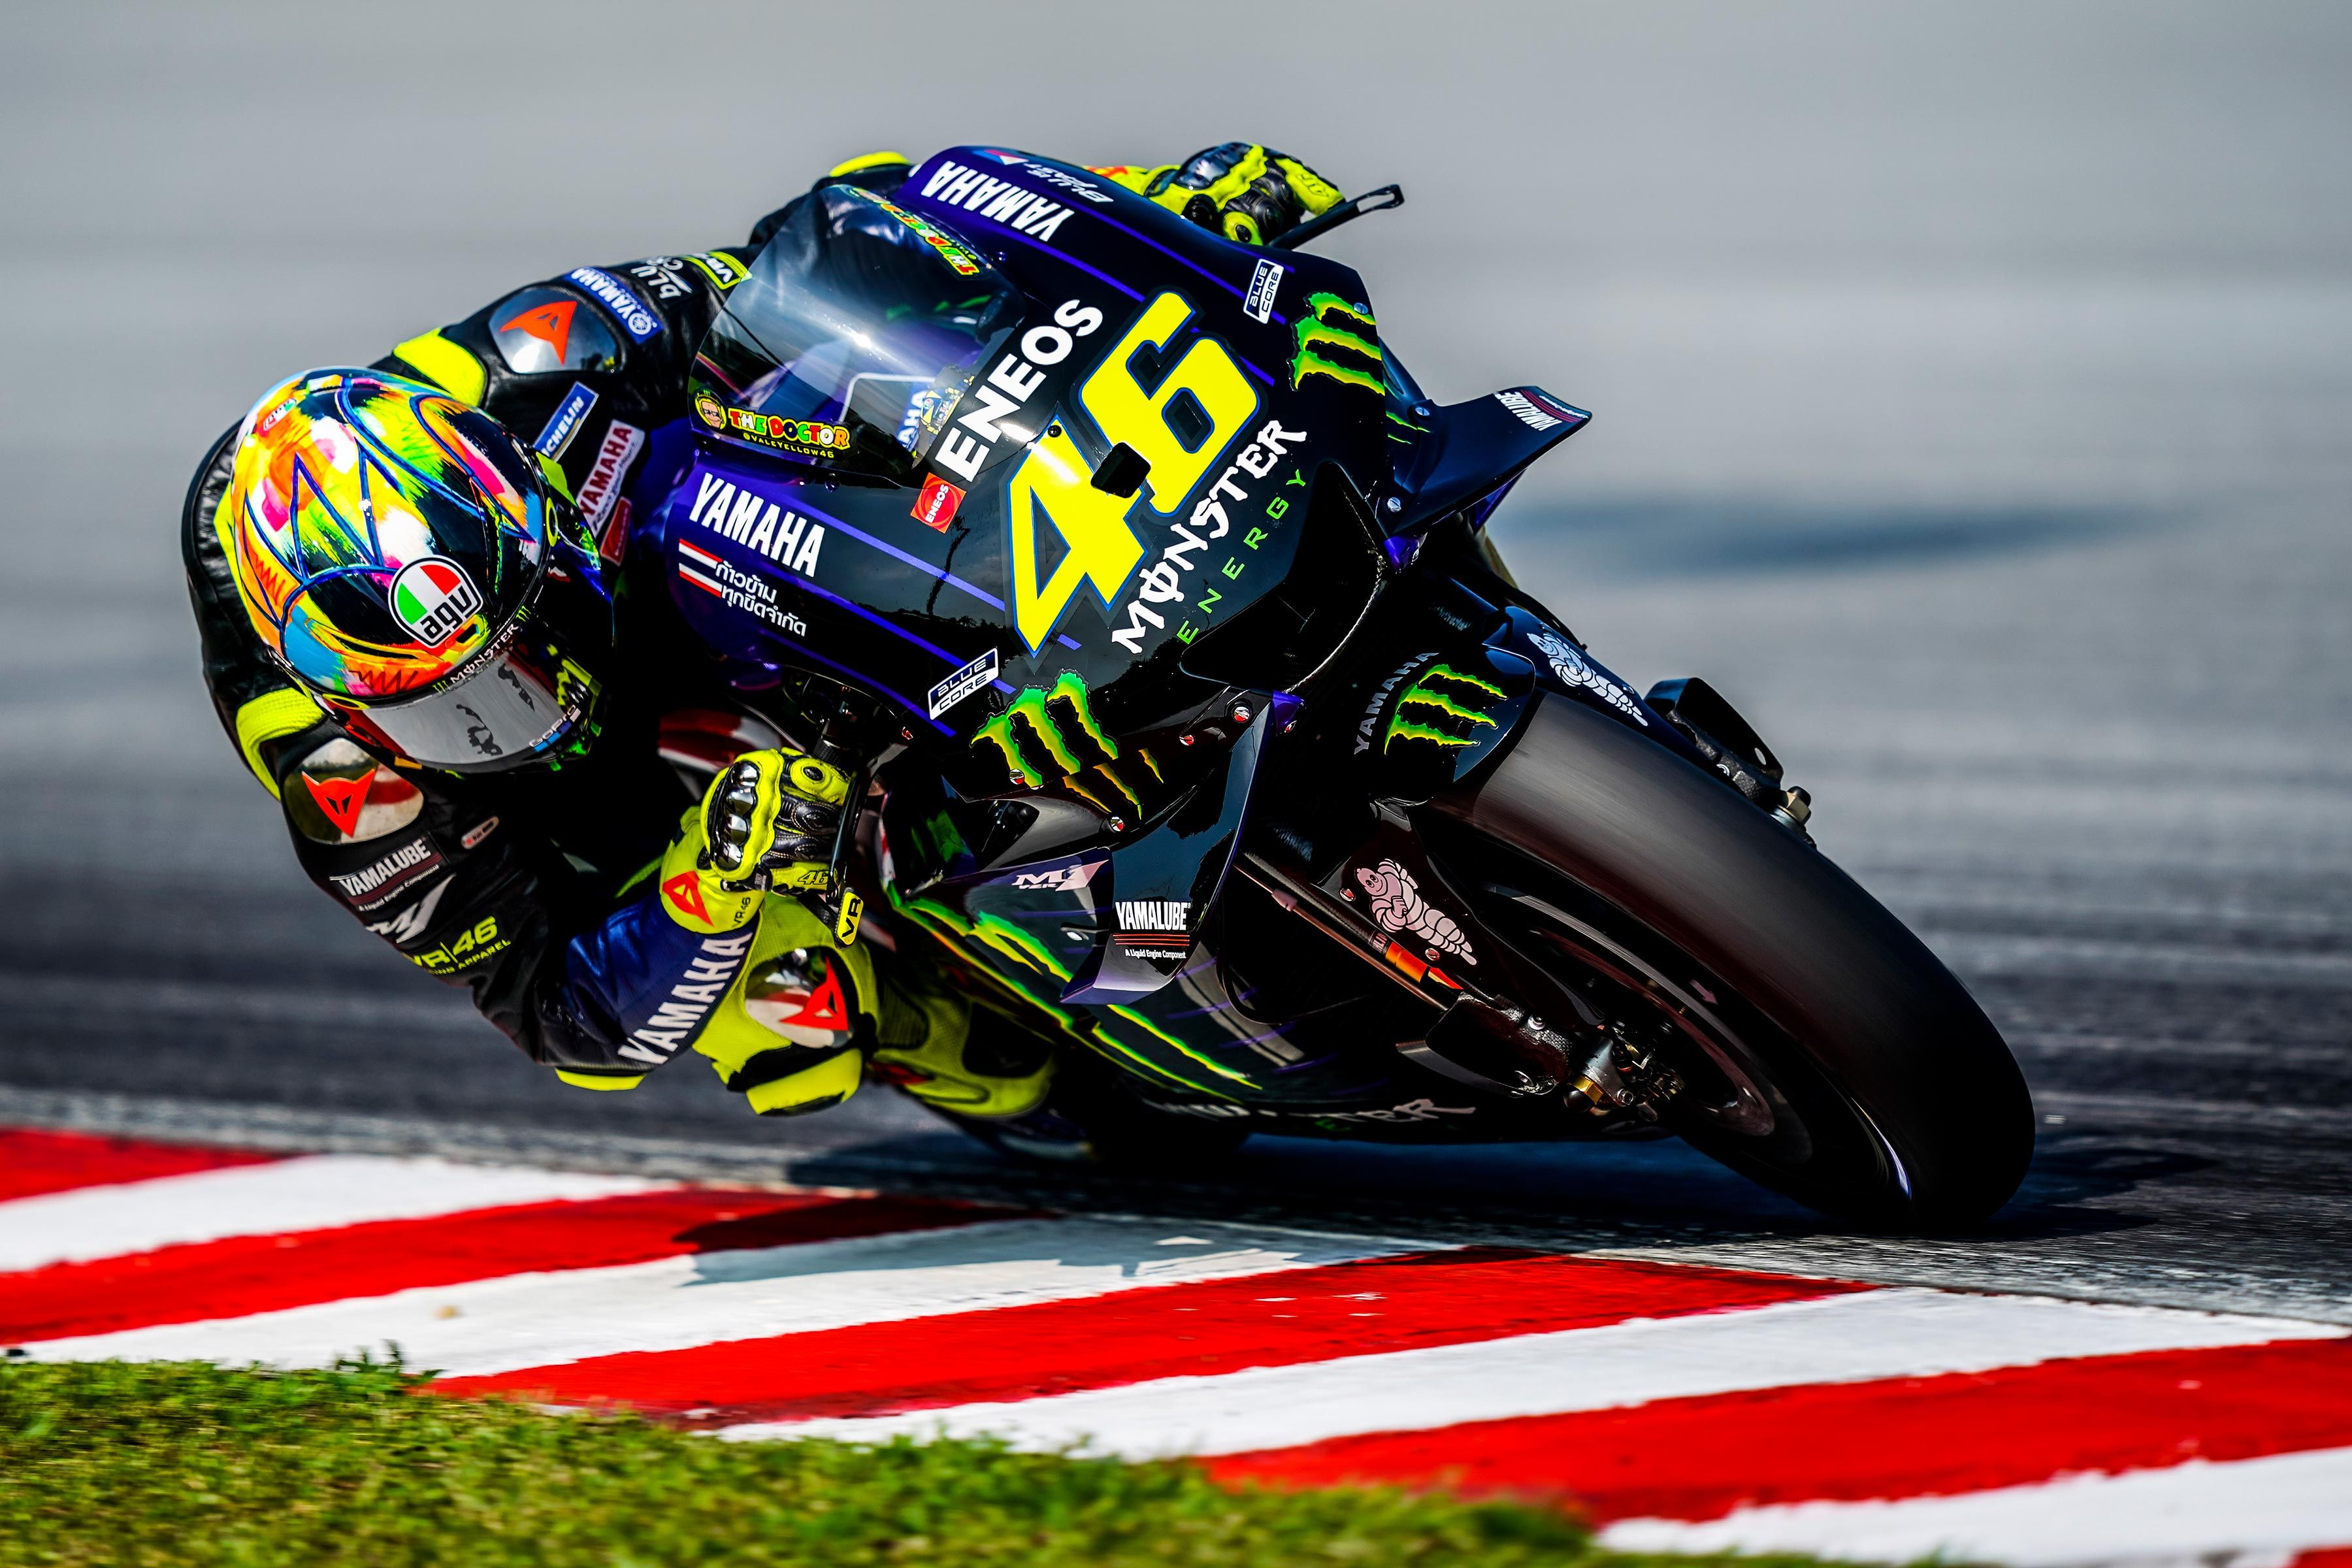  Valentino Rossi Hintergrundbild 3600x2400. Rossi 4K wallpaper for your desktop or mobile screen free and easy to download